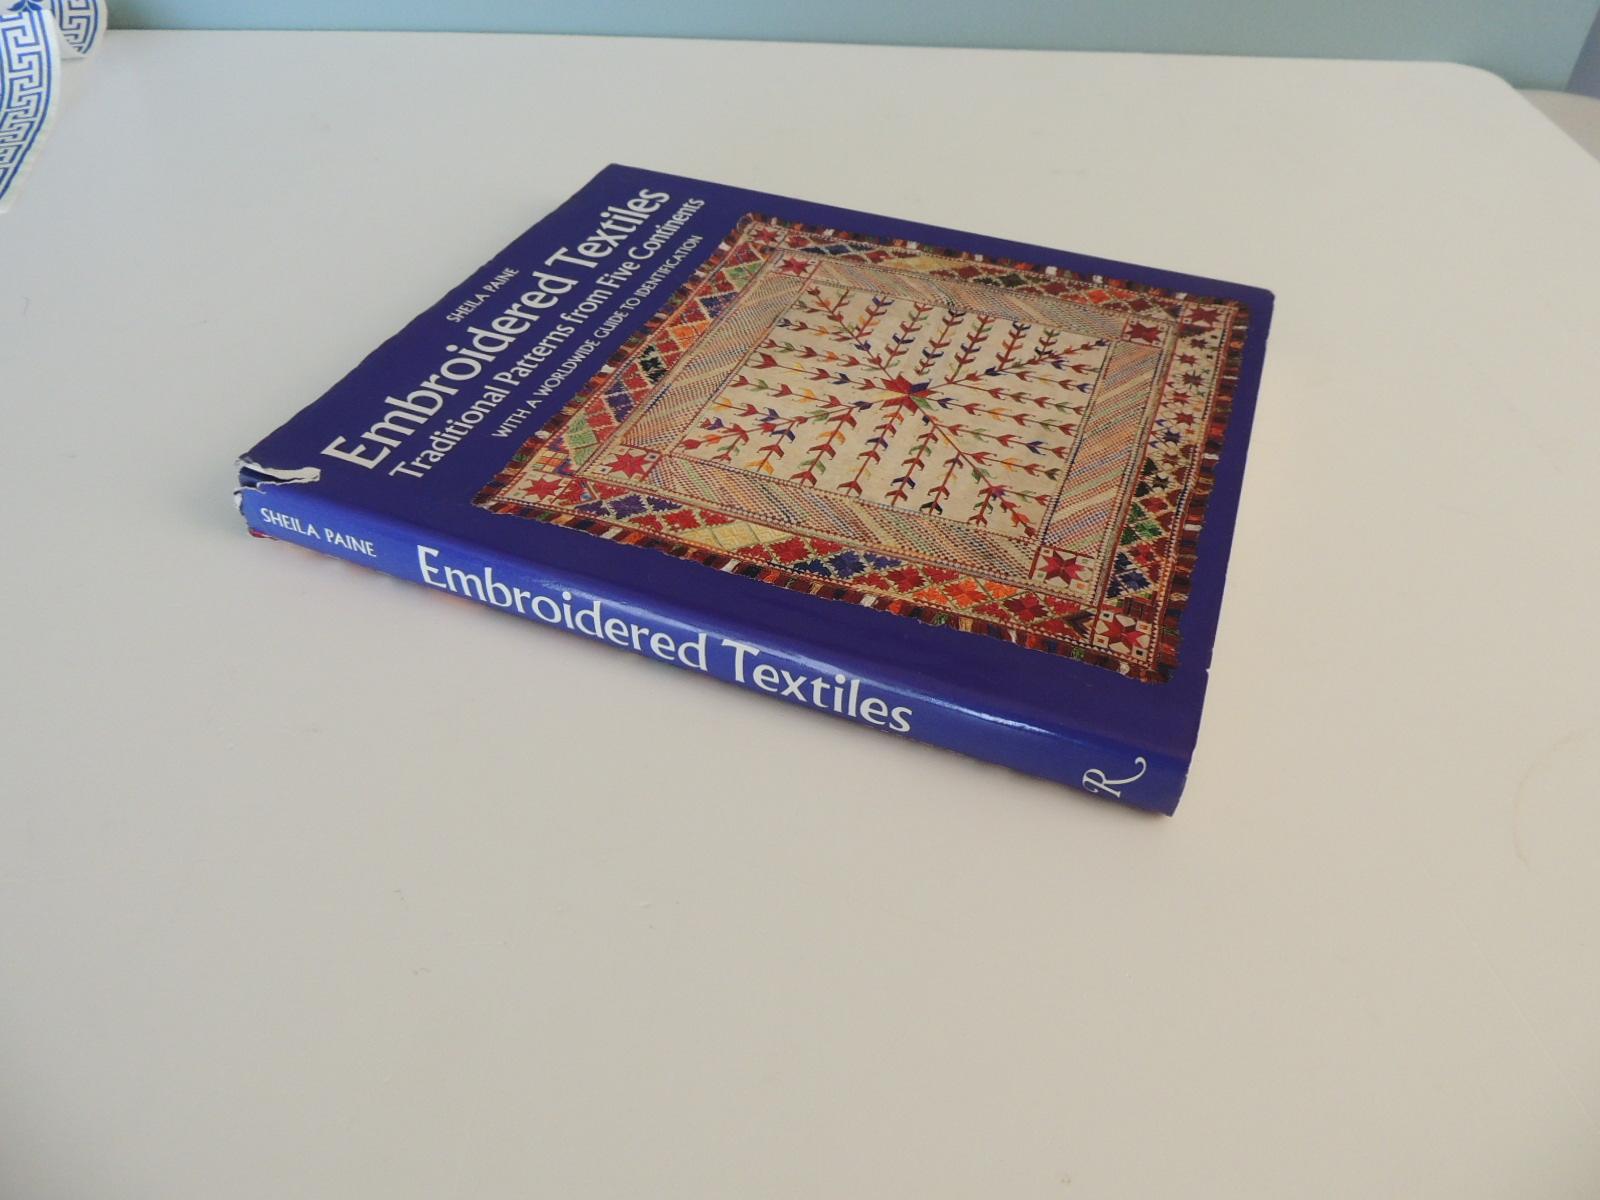 Embroidered Textiles - traditional patterns from five Continents with a worldwide guide to identification hardcover – October 15, 1990
Publisher Rizzoli; 1st Edition (October 15, 1990)
Language English
Hardcover 192 pages
Dimensions 8.5 x 0.75 x